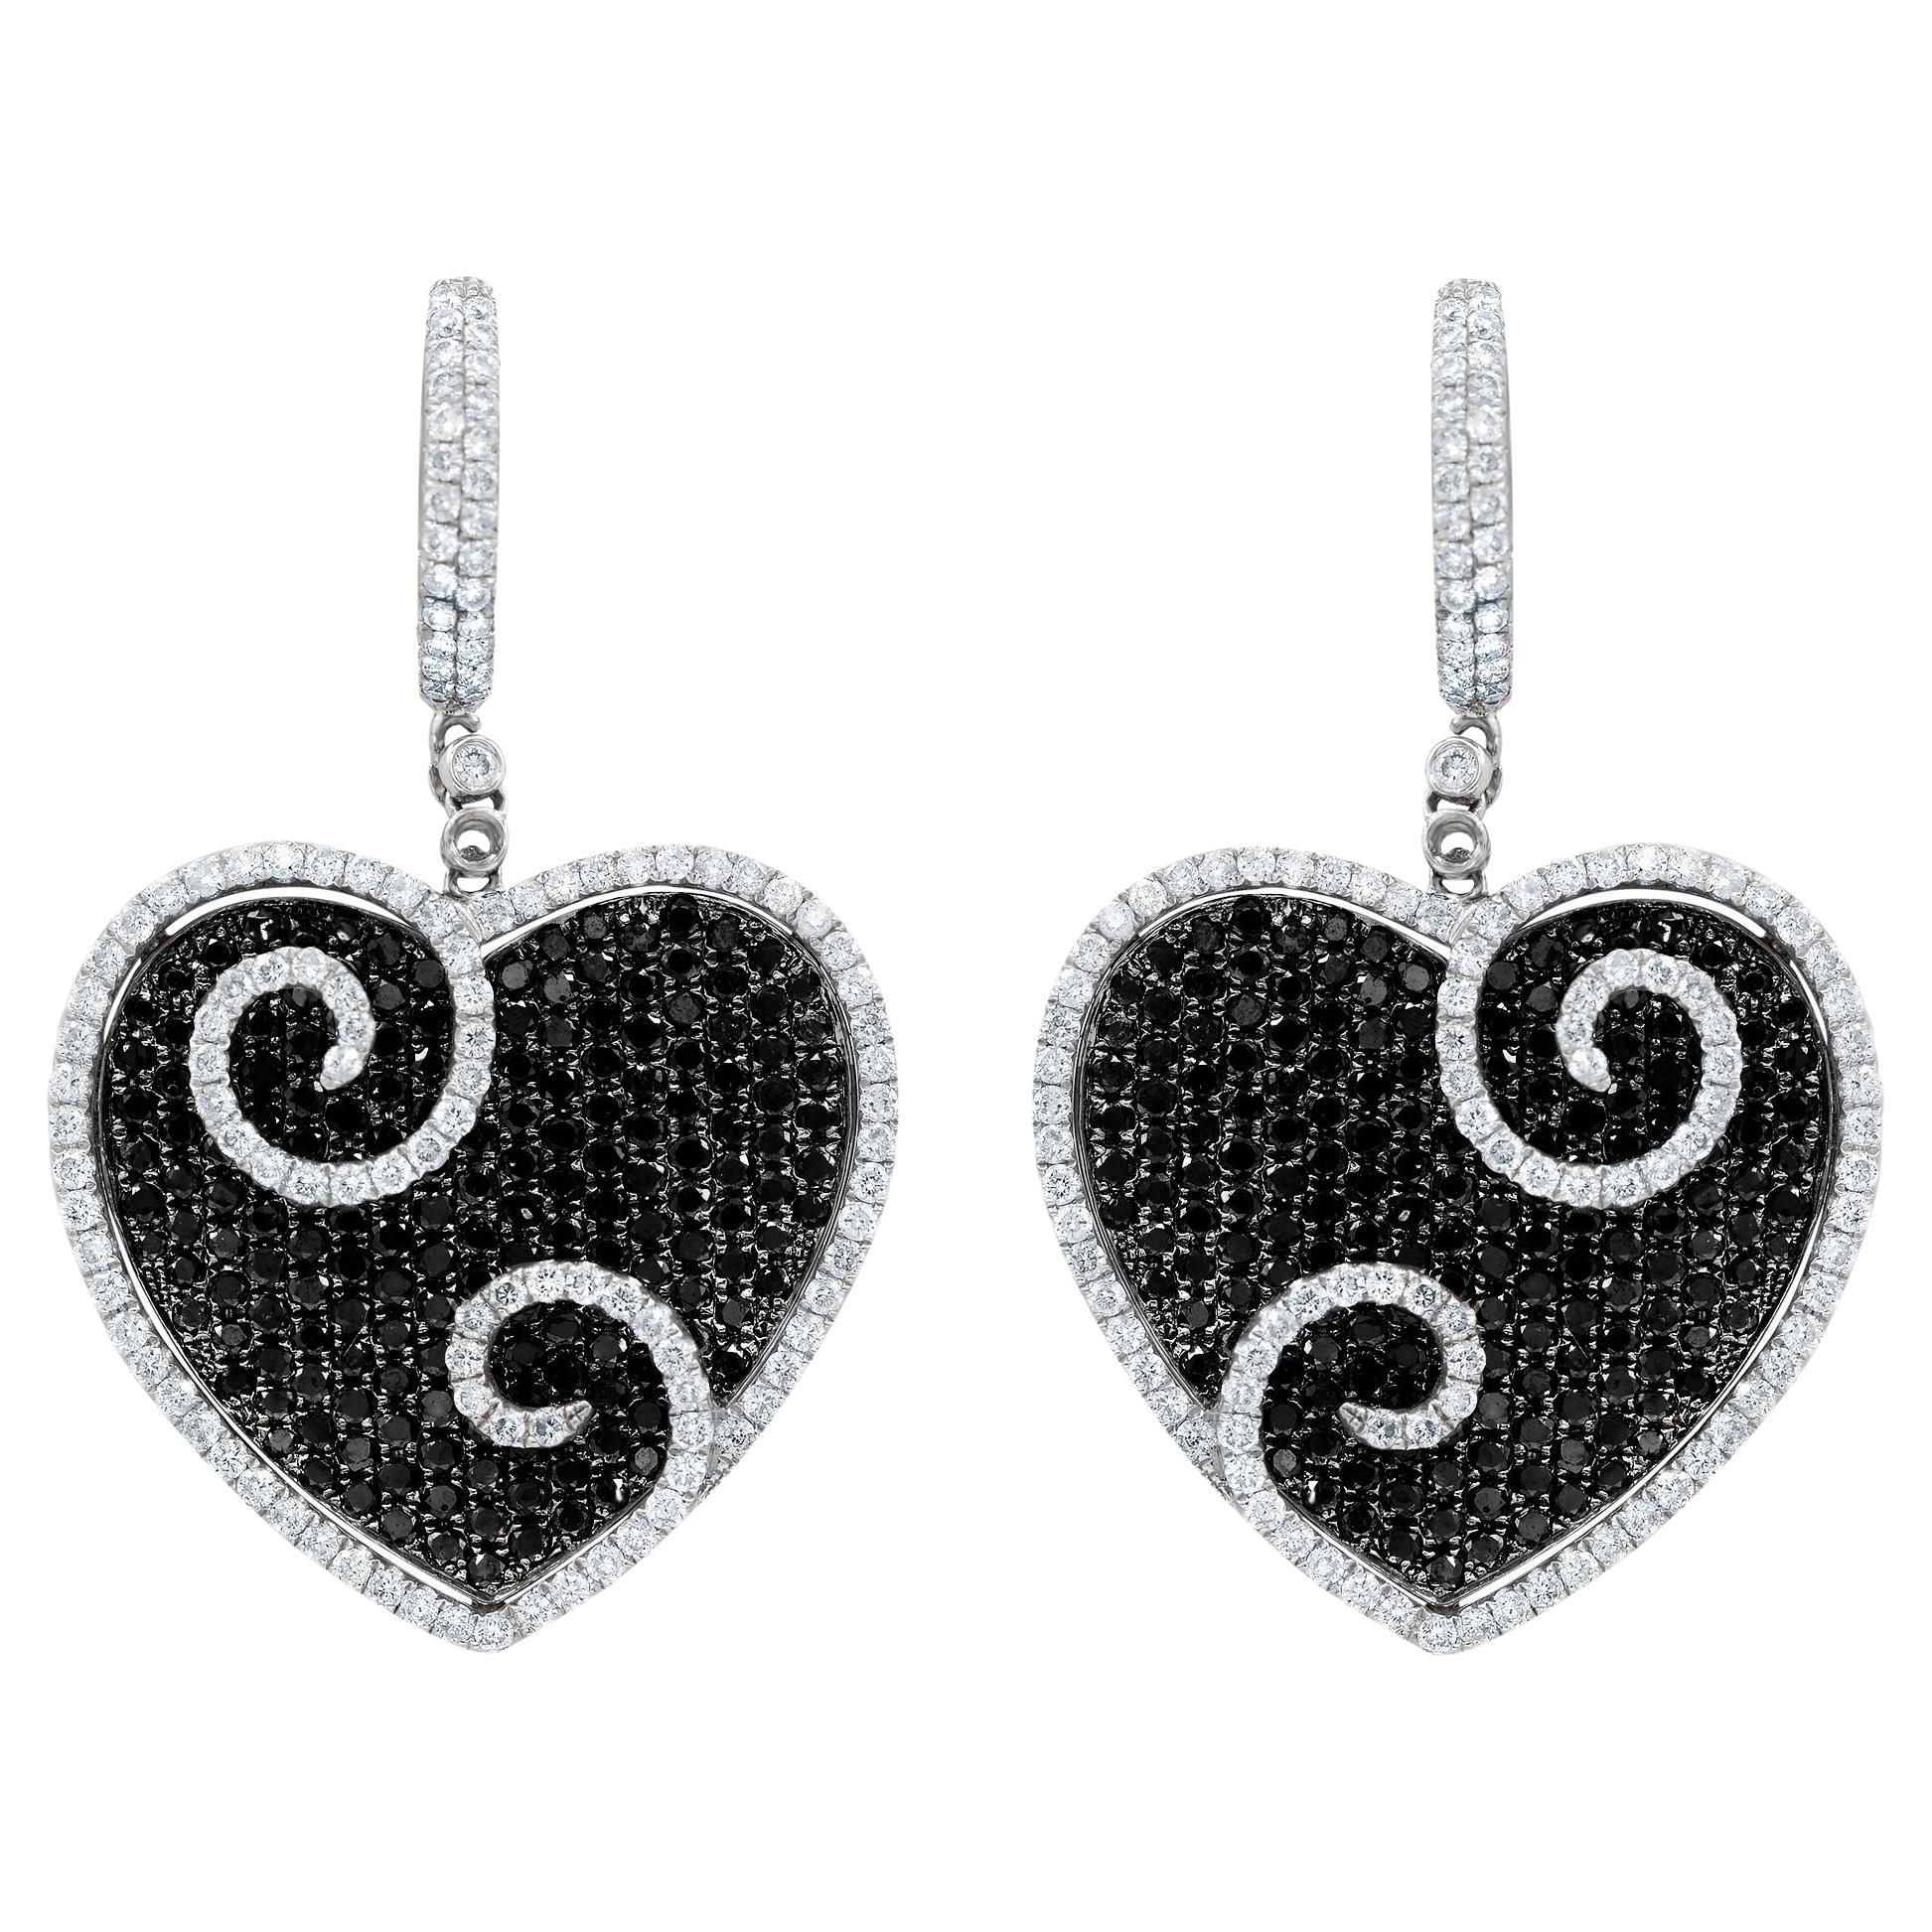 Diana M. 18 kt White Gold Diamond Heart Earrings Containing 5.23 cts 